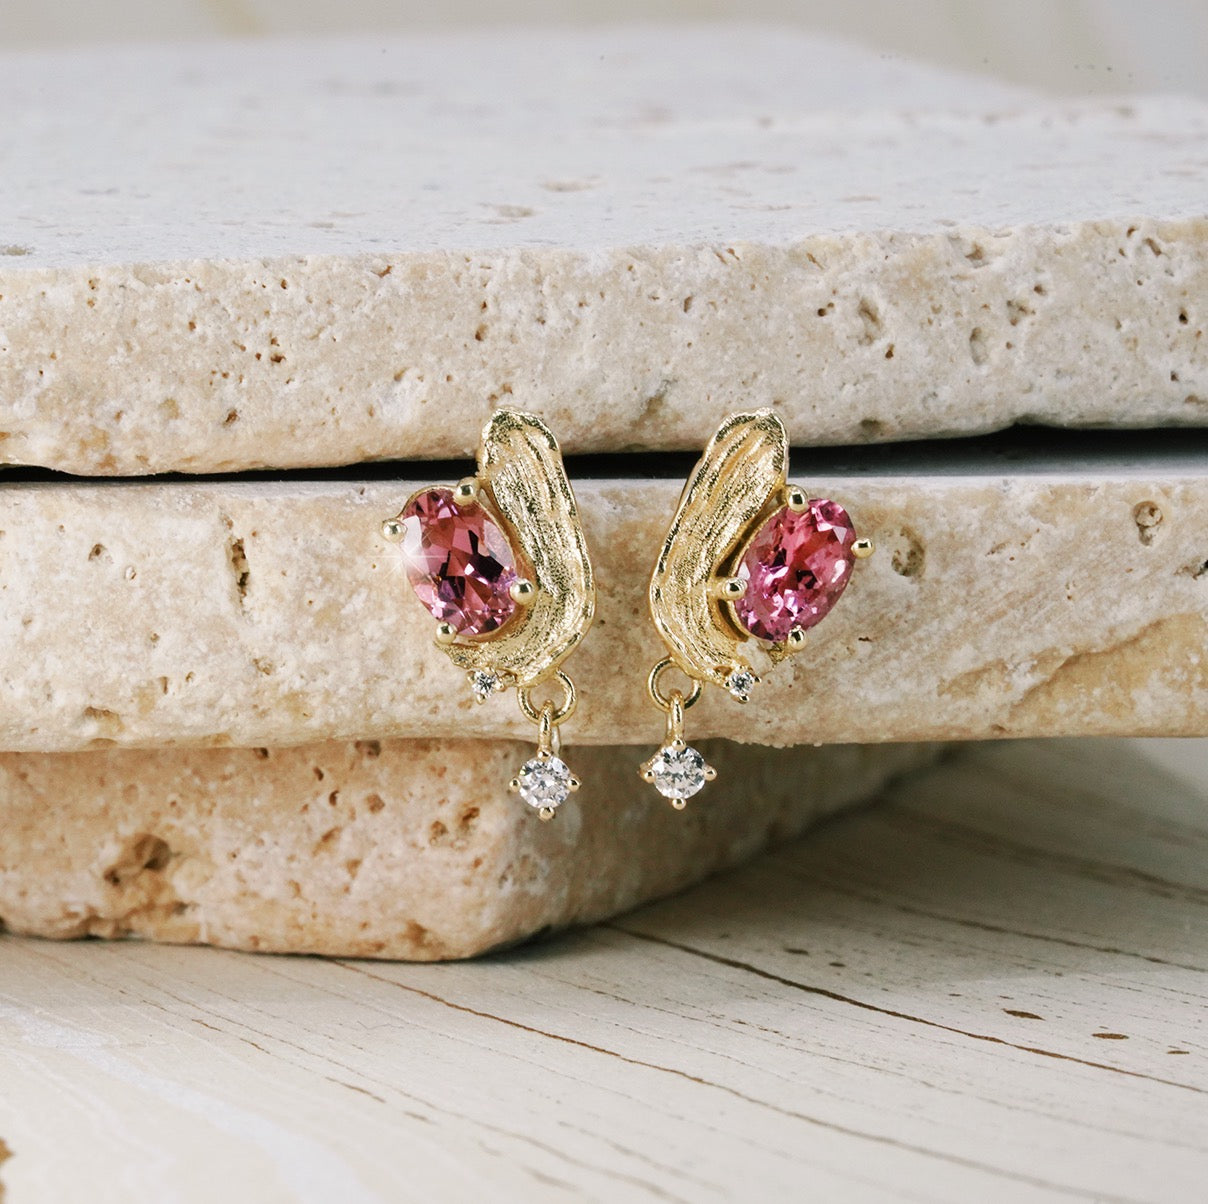 Rose Madder Stud Earrings with Pink Tourmaline and Diamond - PAIR